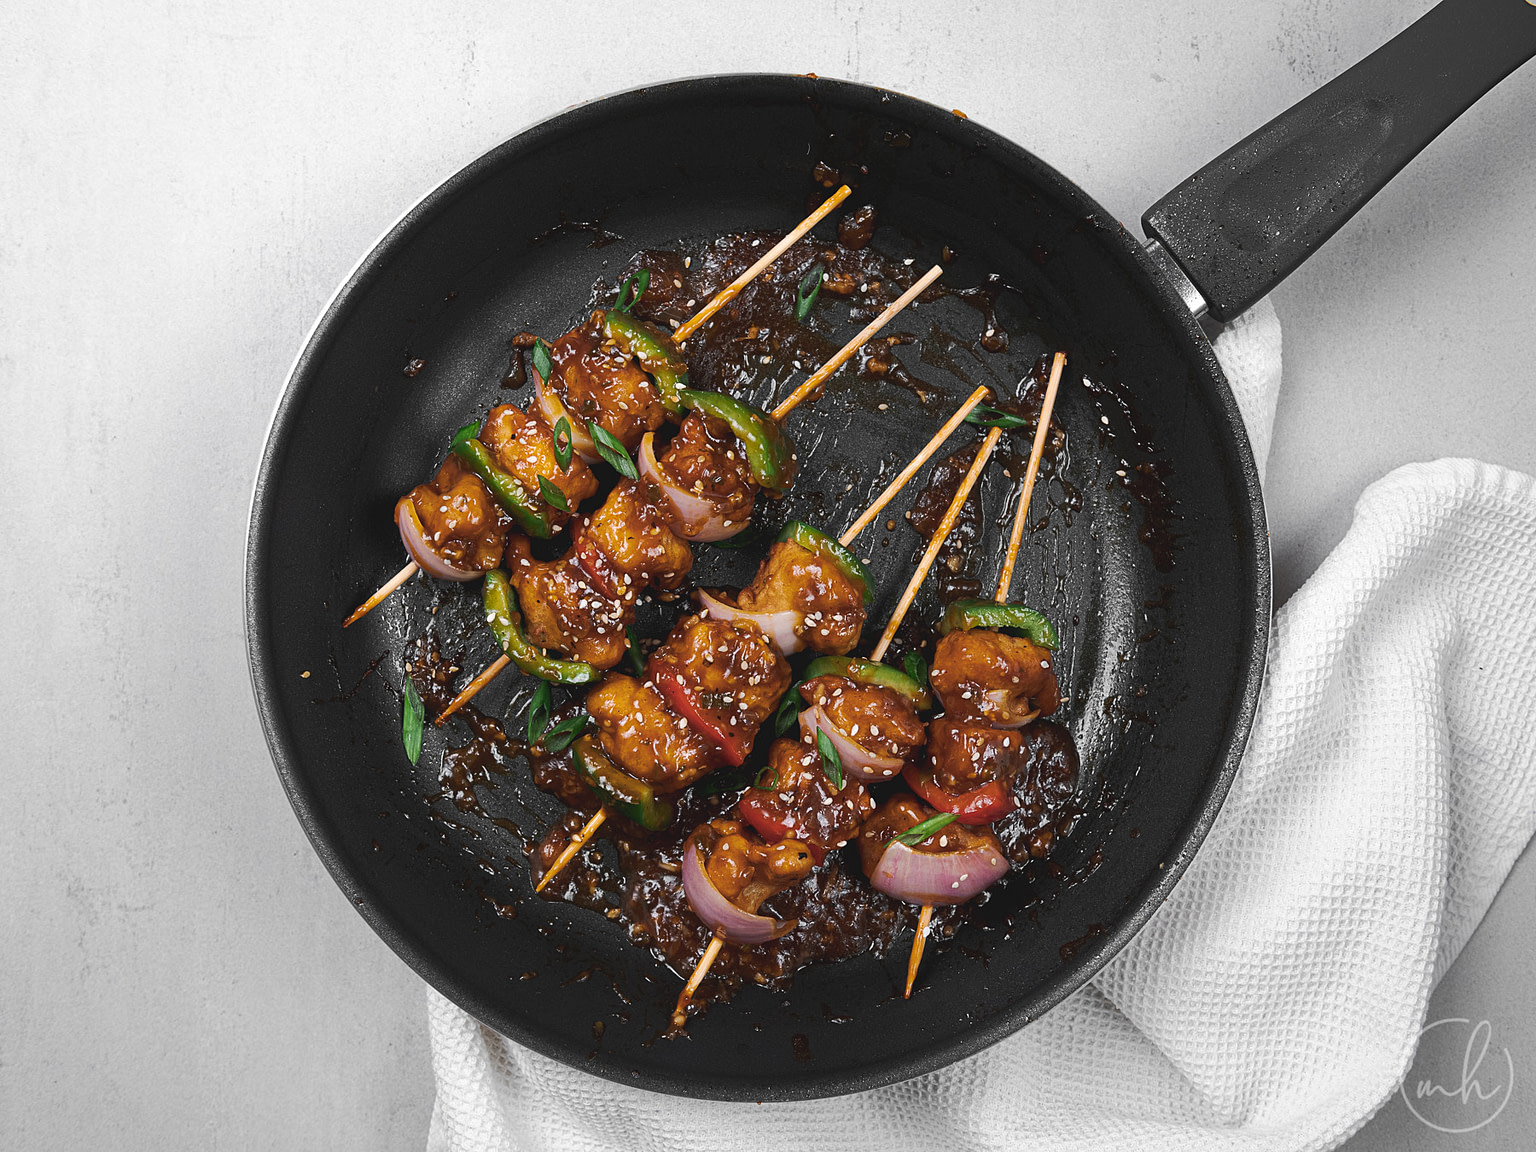 Cauliflower and paneer manchurian skewers in a pan, with a cloth underneath.